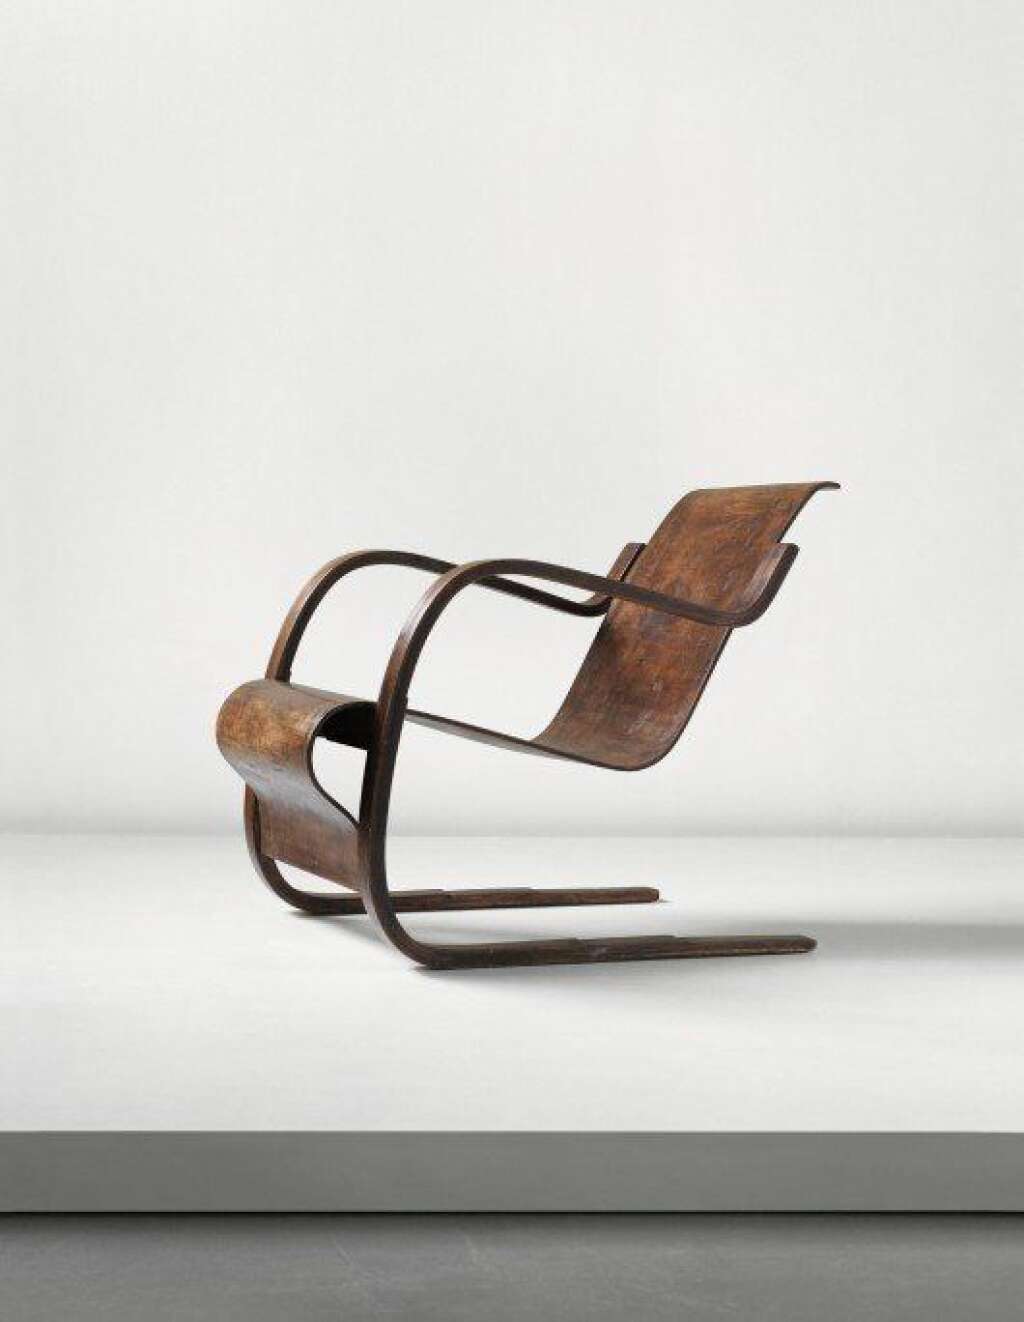 Alvar Aalto : "Early cantilevered armchair with stepped base" -